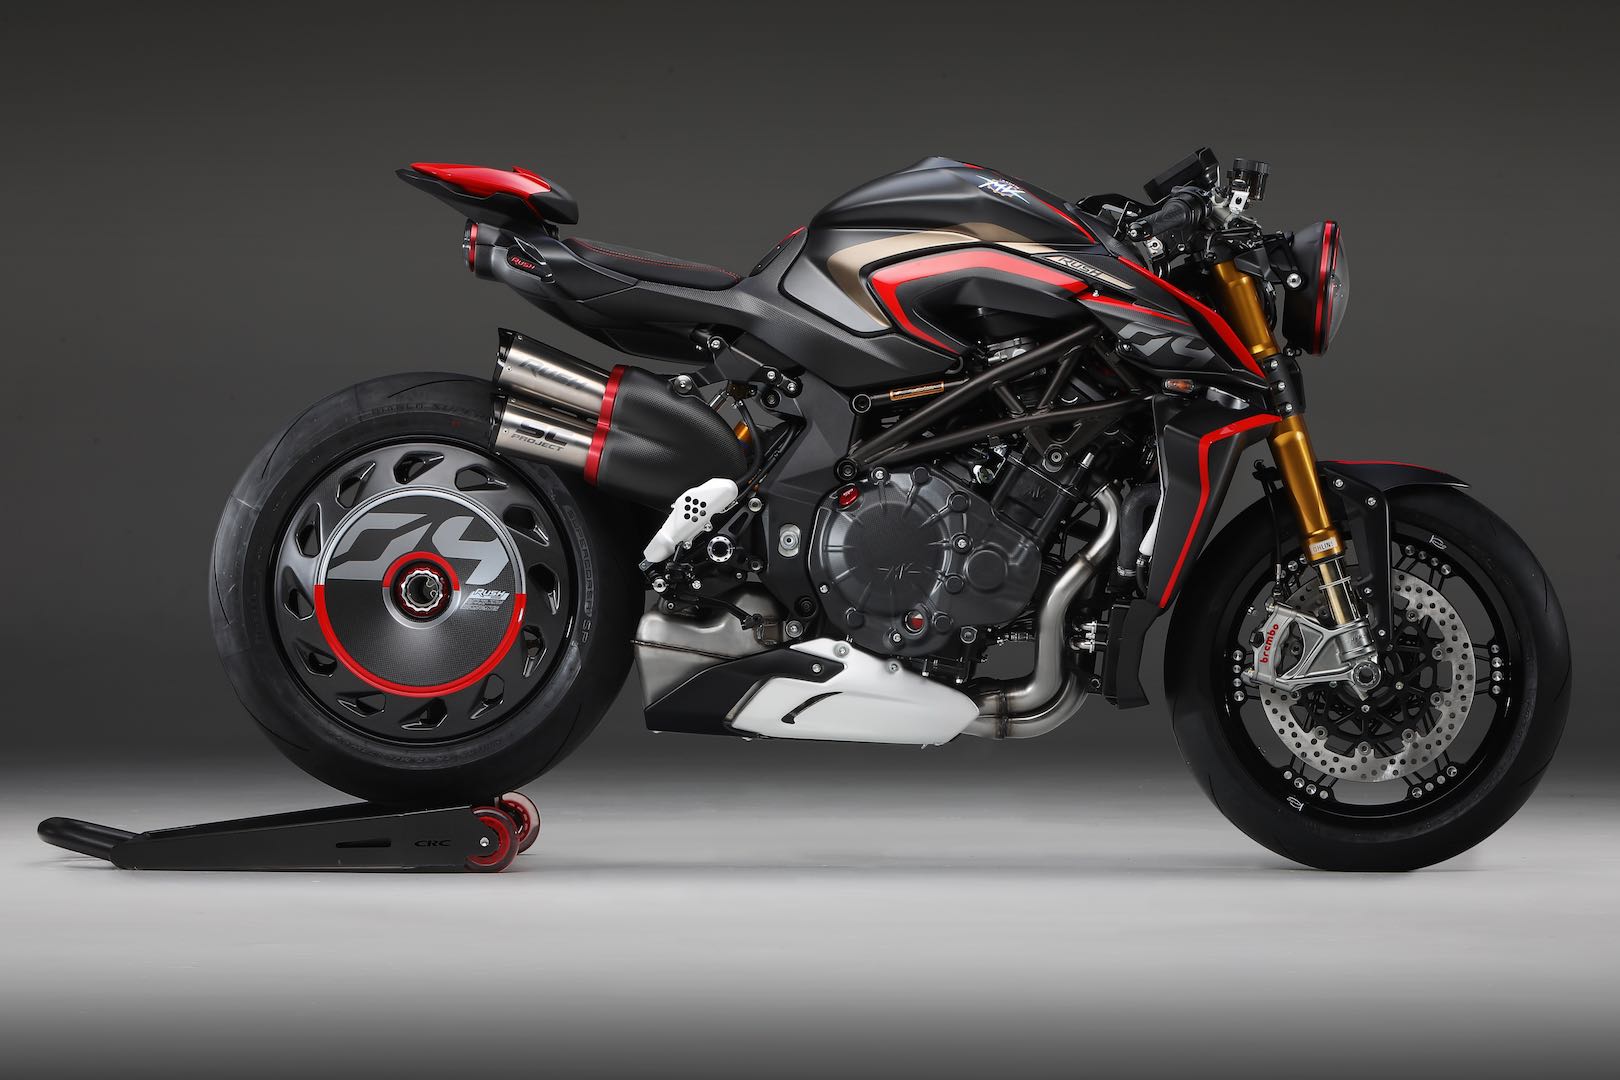 MV Agusta Brutale 1000 RR | Motorcycle News, Sport and Reviews